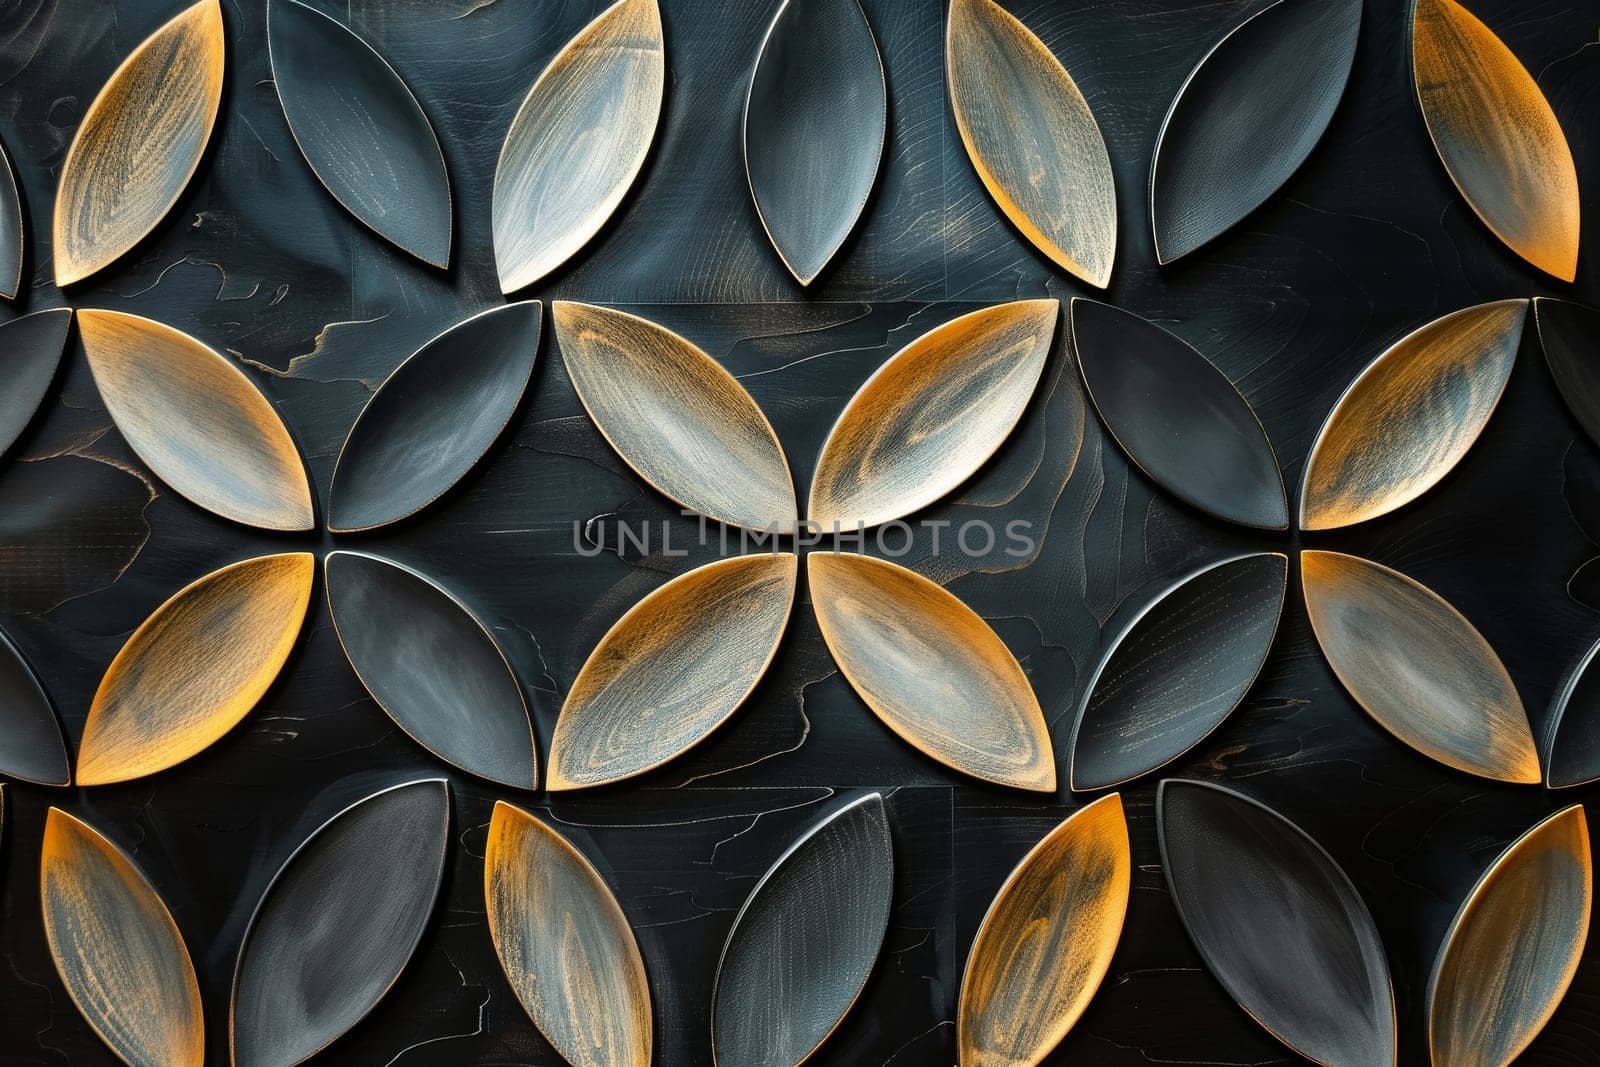 A black and gold design of flower shapes. The design is made up of various shapes and sizes, with some of the shapes being larger than others. The overall effect is a visually striking